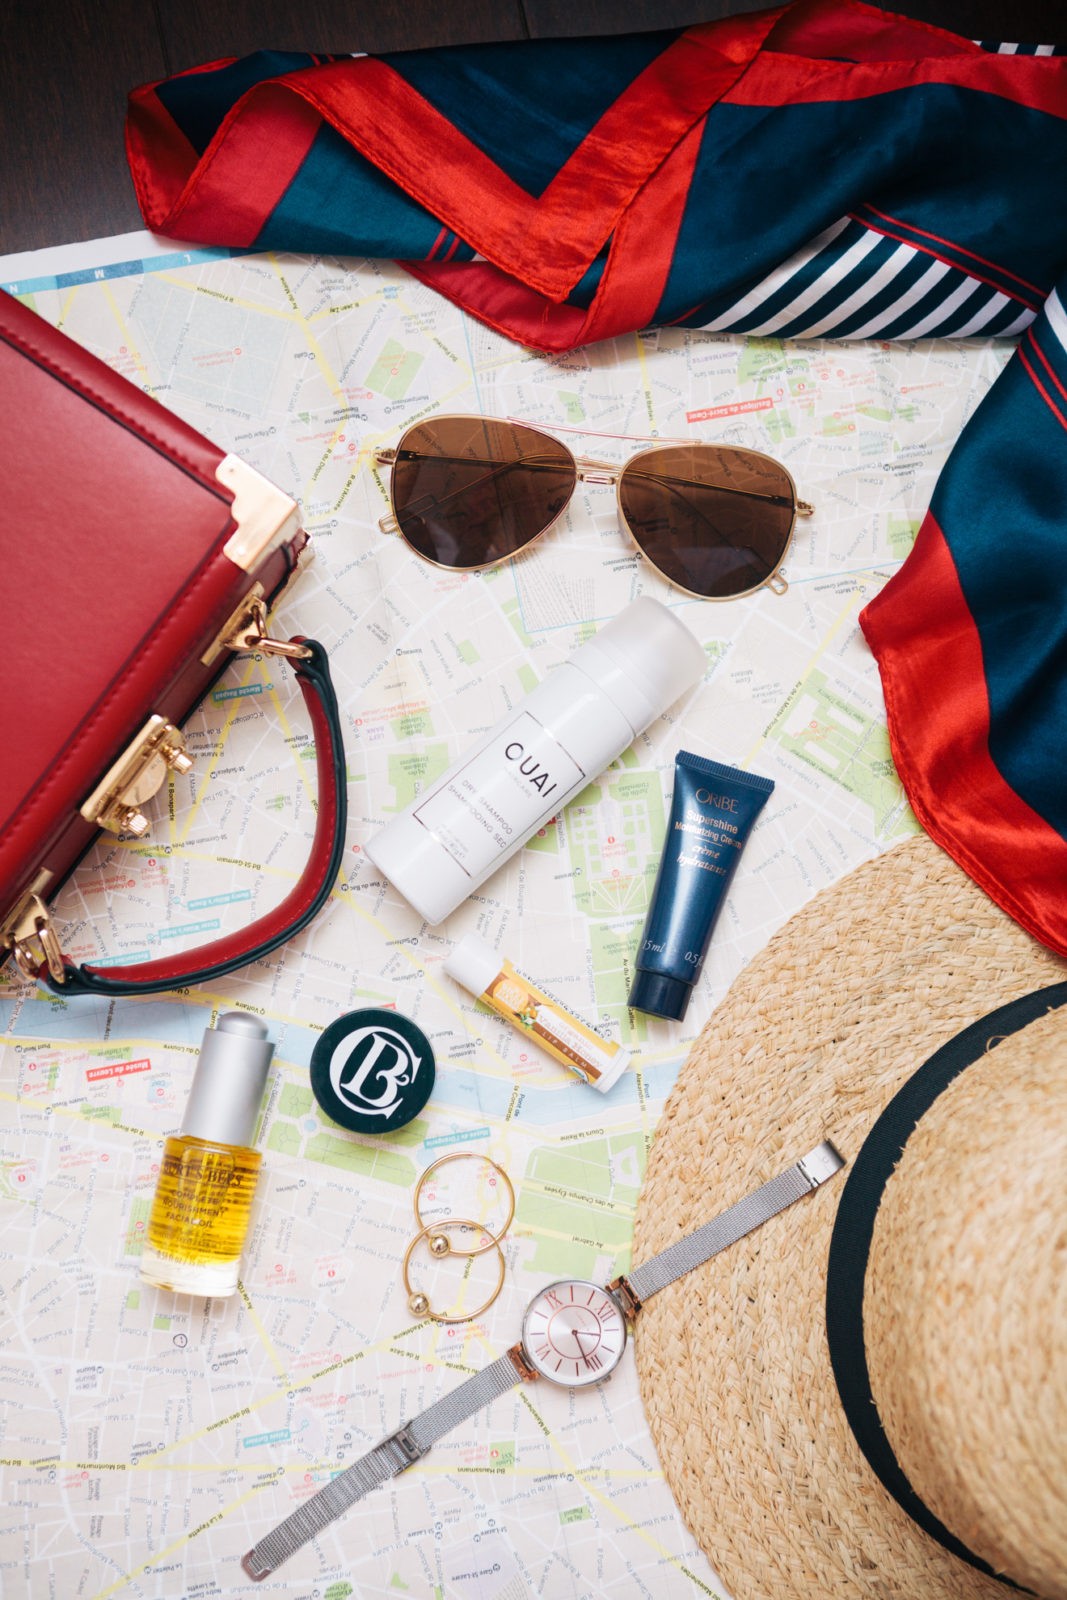 The Travel Size Beauty Products I Never Leave Home Without by Beauty Blogger Laura Lily, Ouai dry shampoo, Burts Bees Complete Nourishment Facial Oil, Clark Botanicals Deep Moisture Mask,